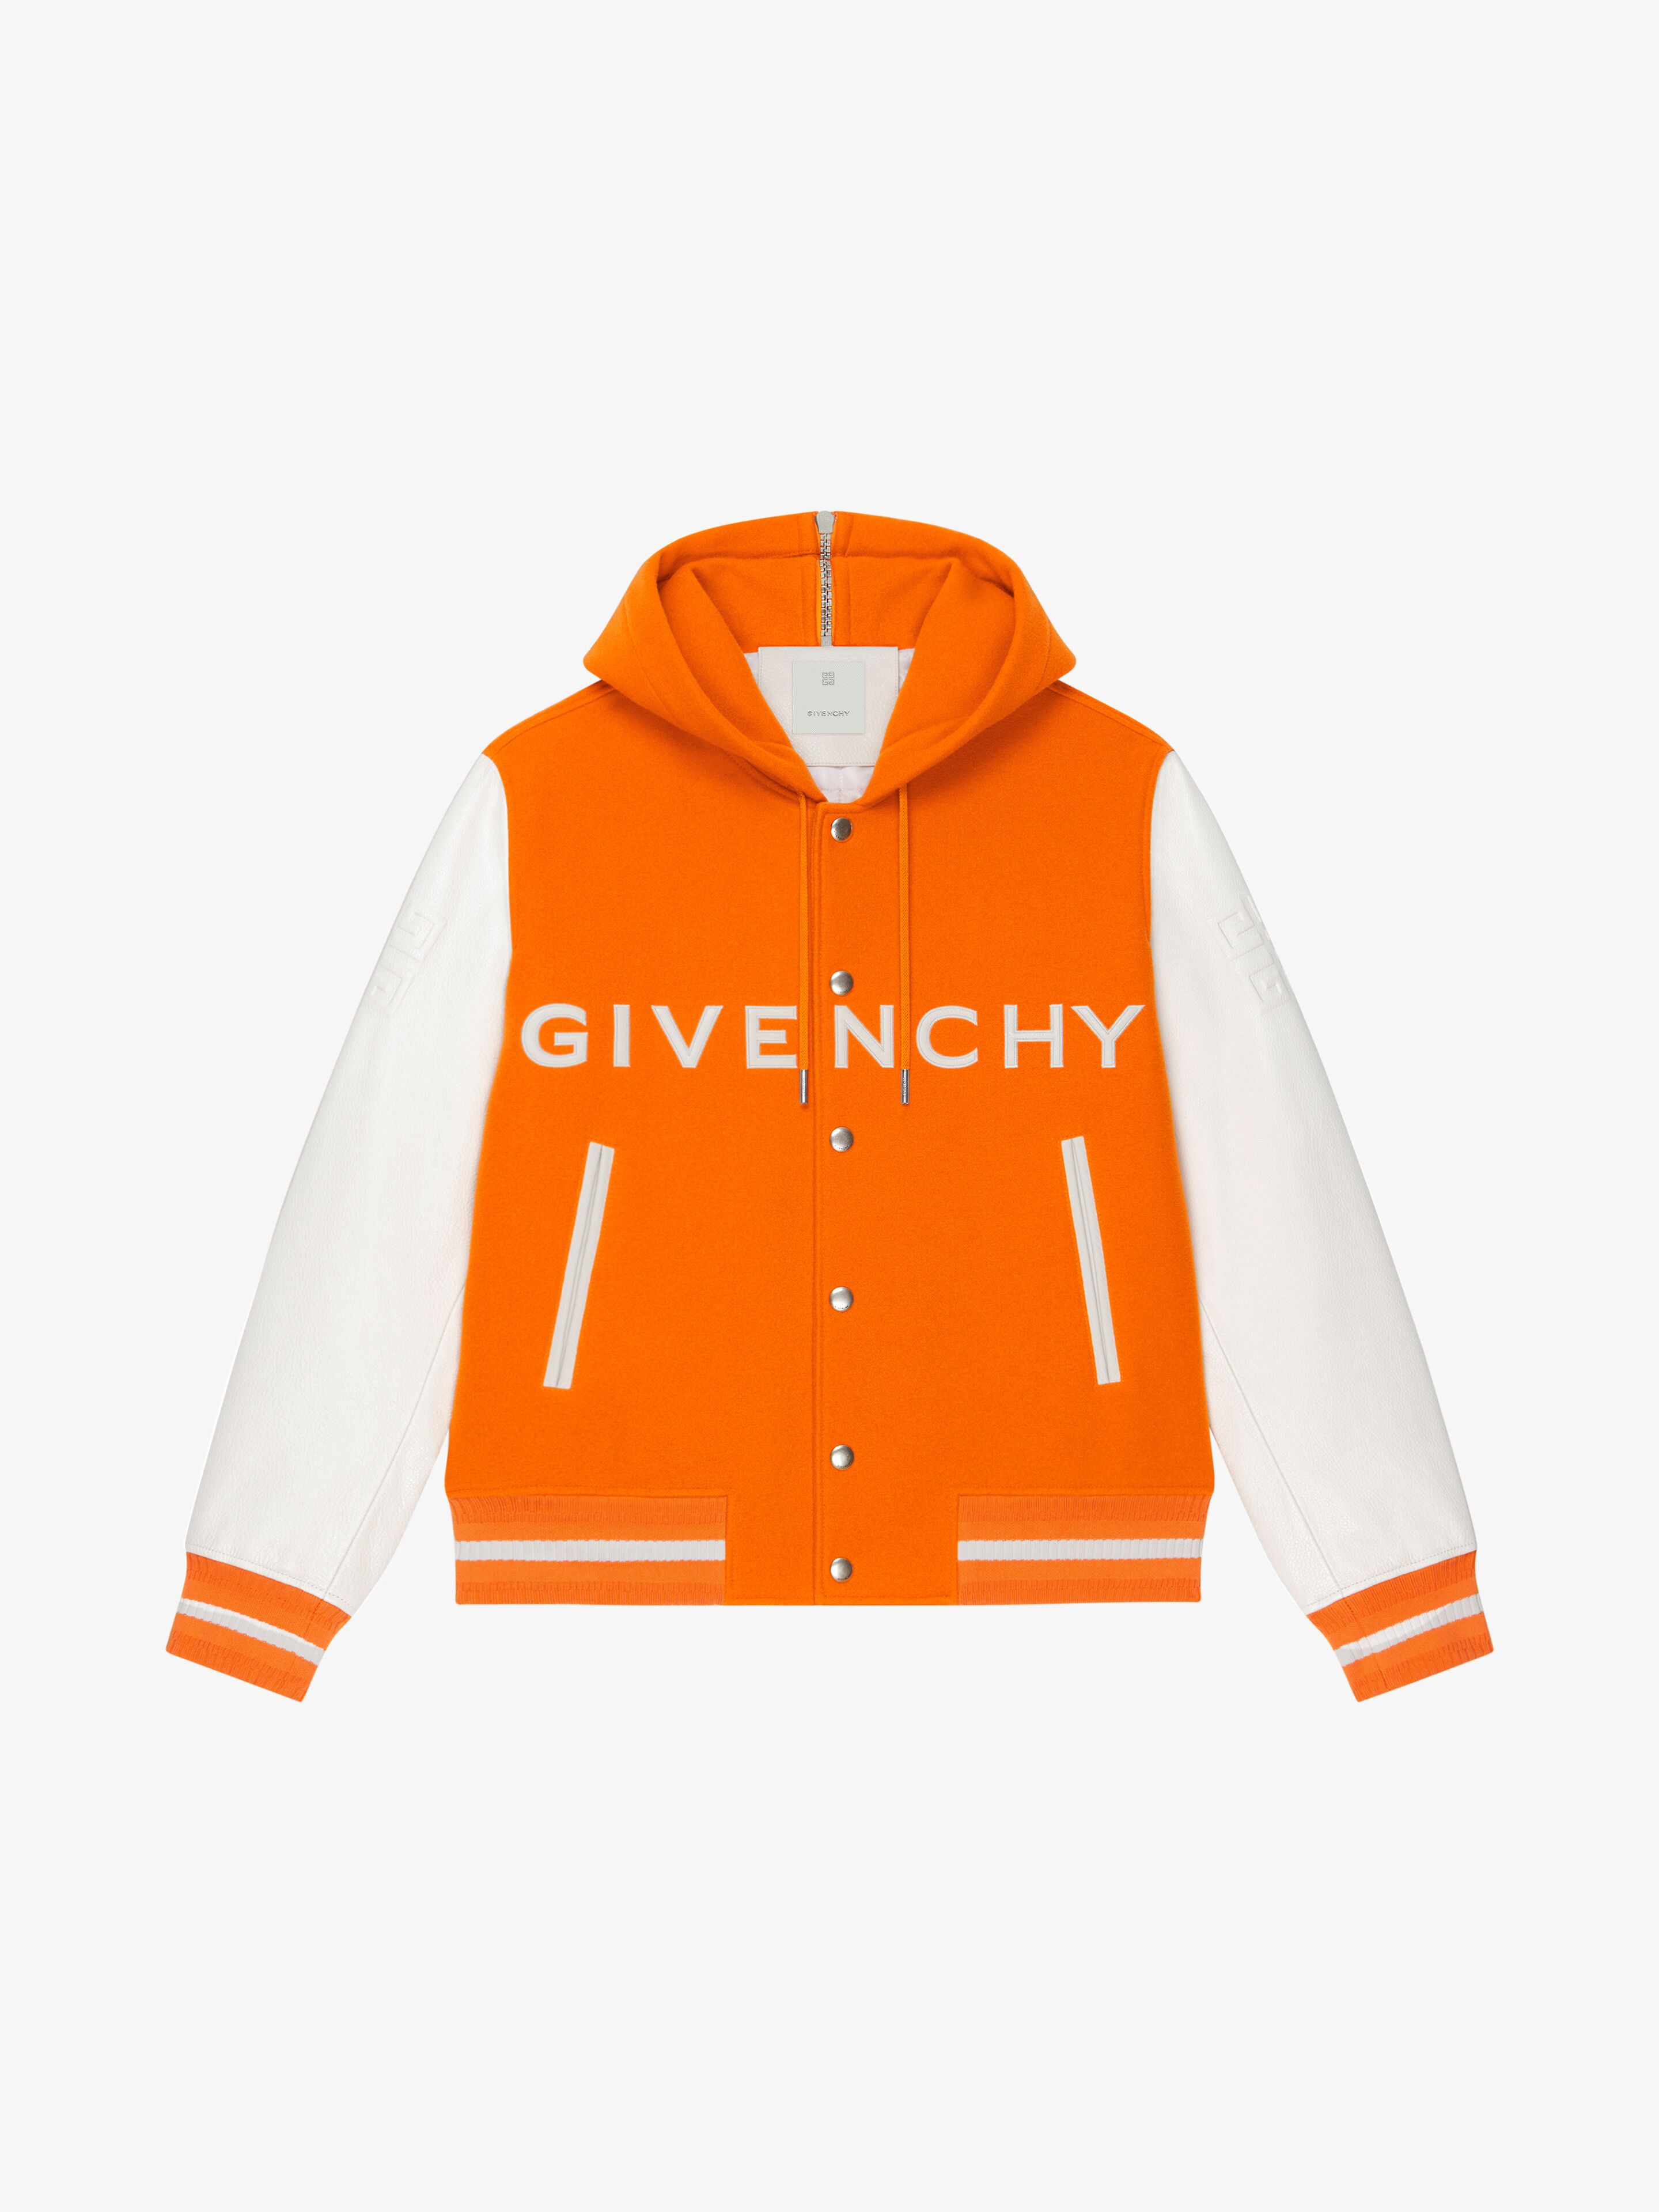 Givenchy Men's Hooded Varsity Jacket In Wool And Leather In Orange